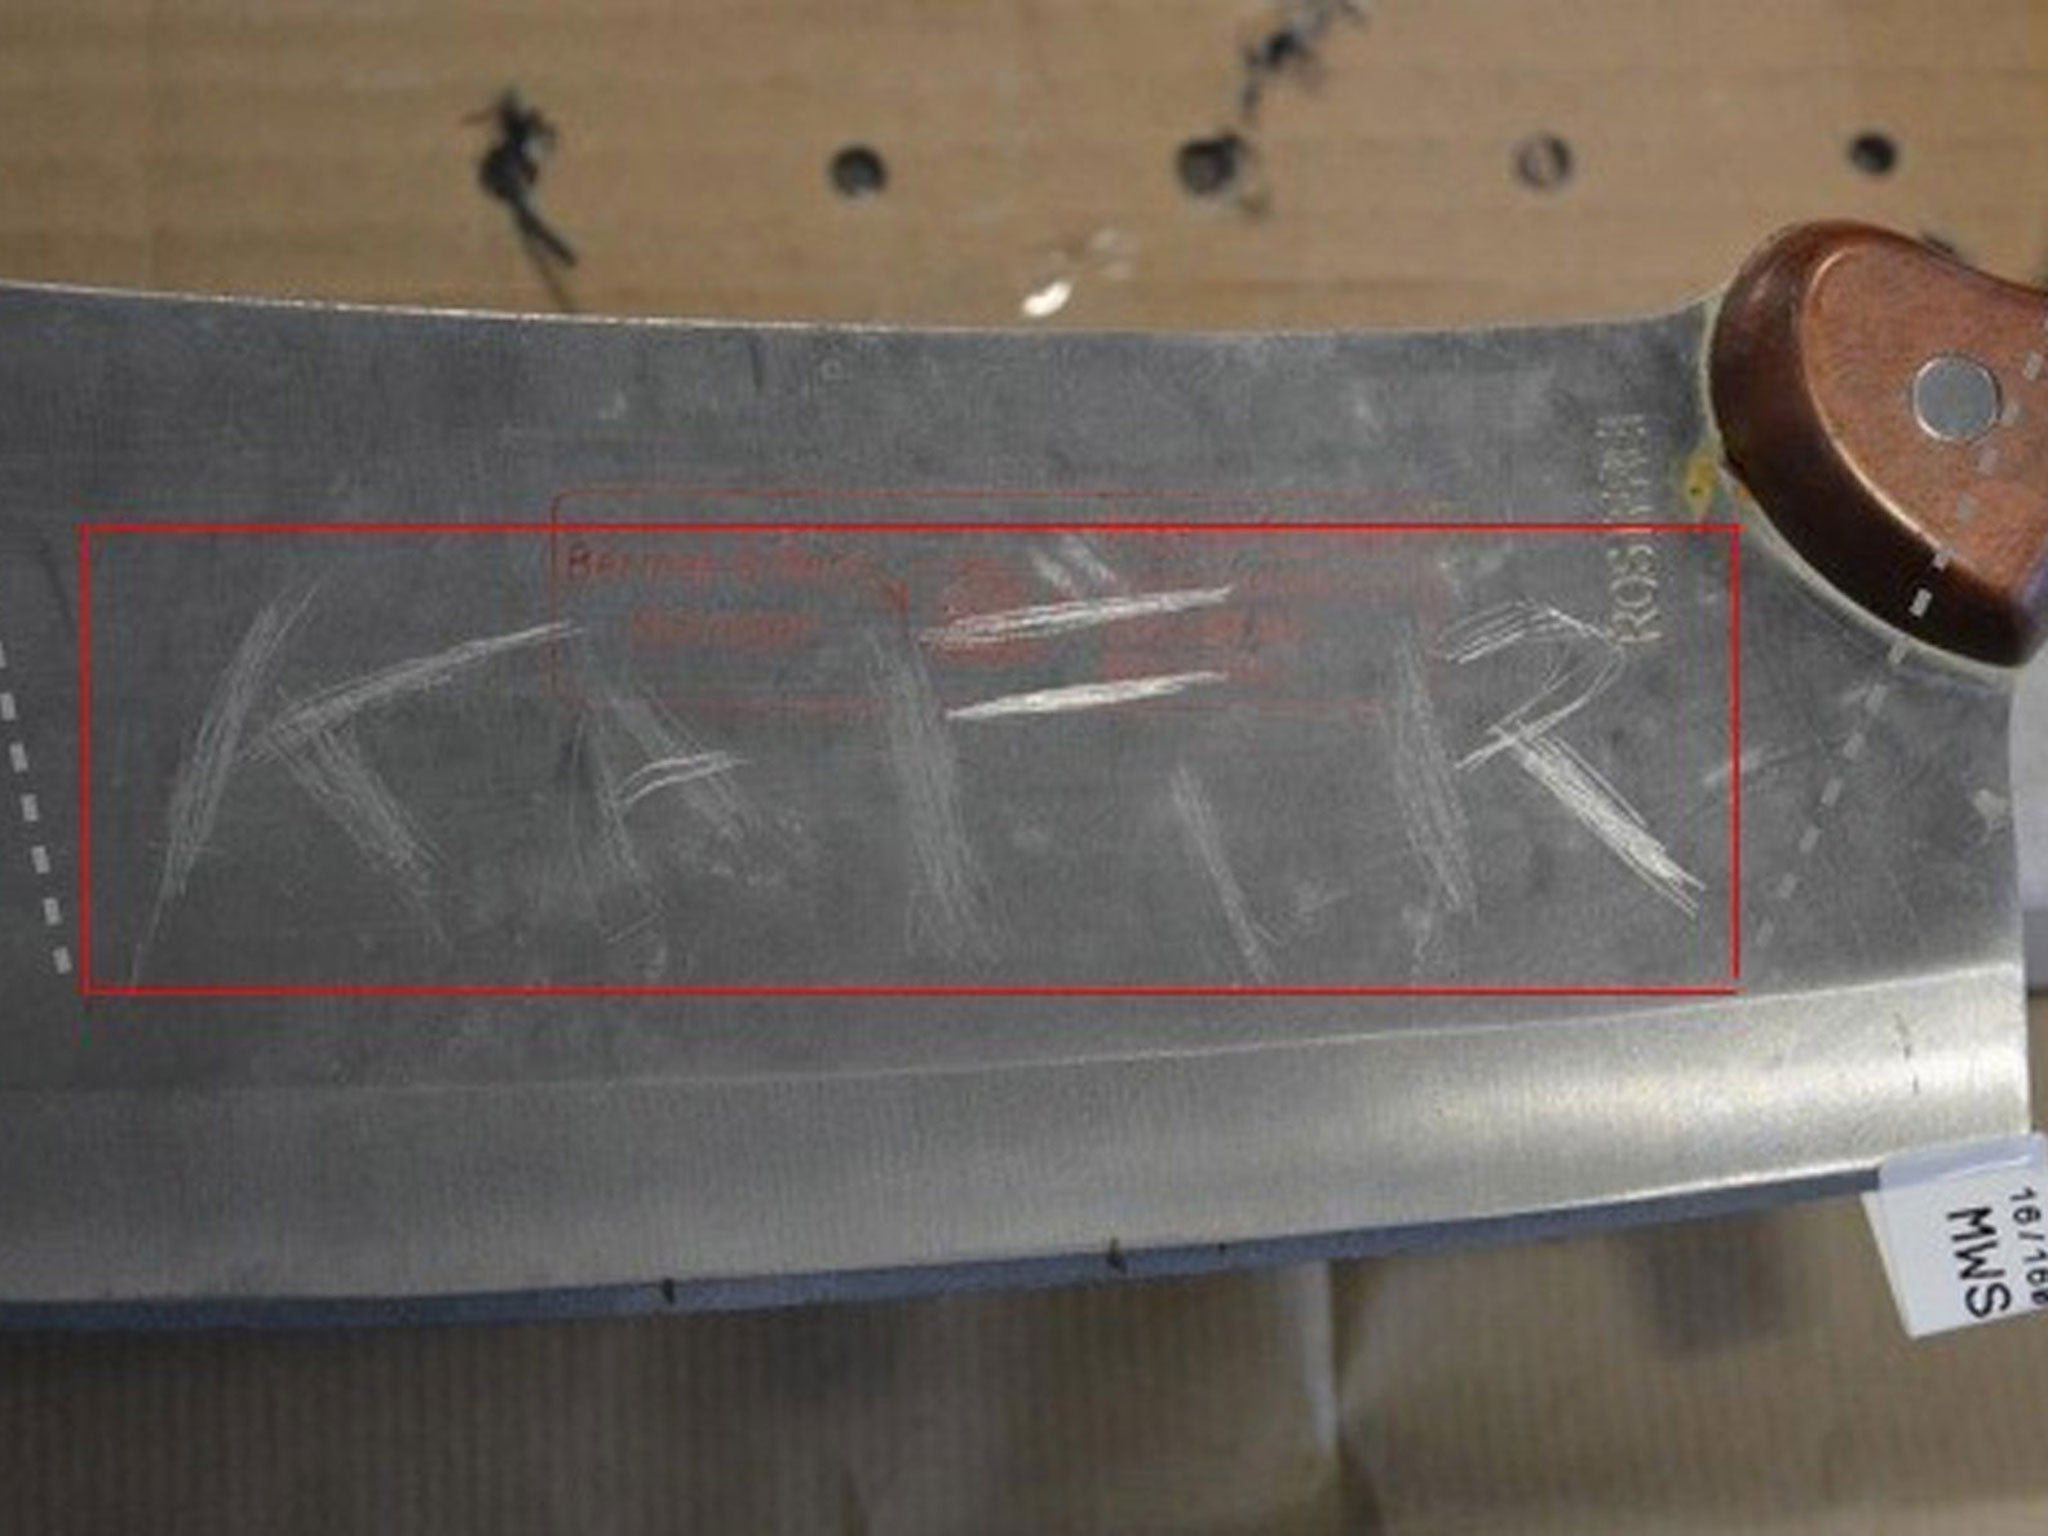 Meat cleaver found in Naweed Ali’s car with the word kafir (non-believer) scratched on the blade